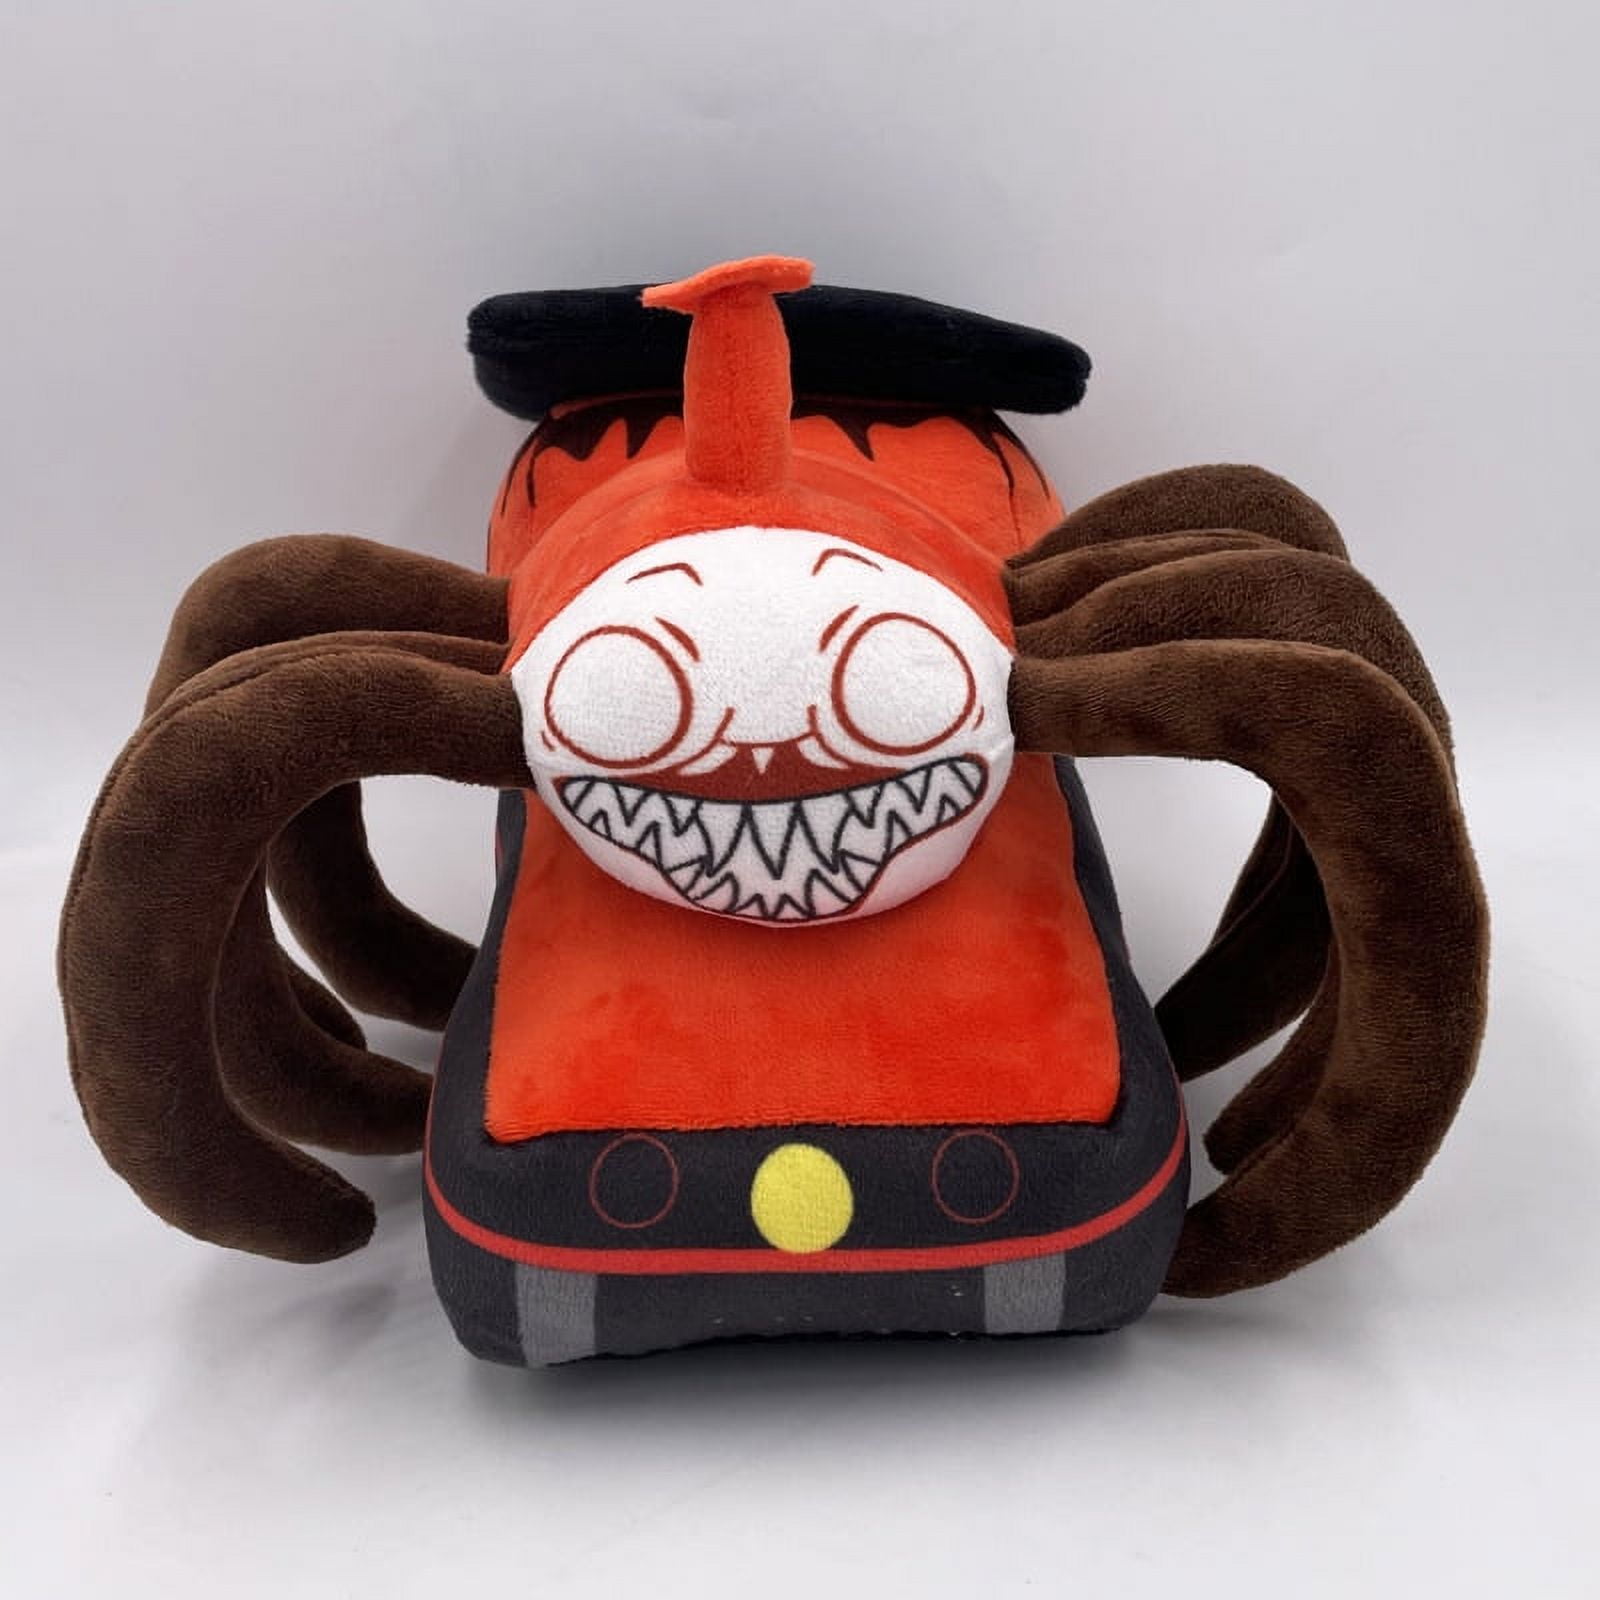 Banette Sitting Cuties Plush - 6 In.